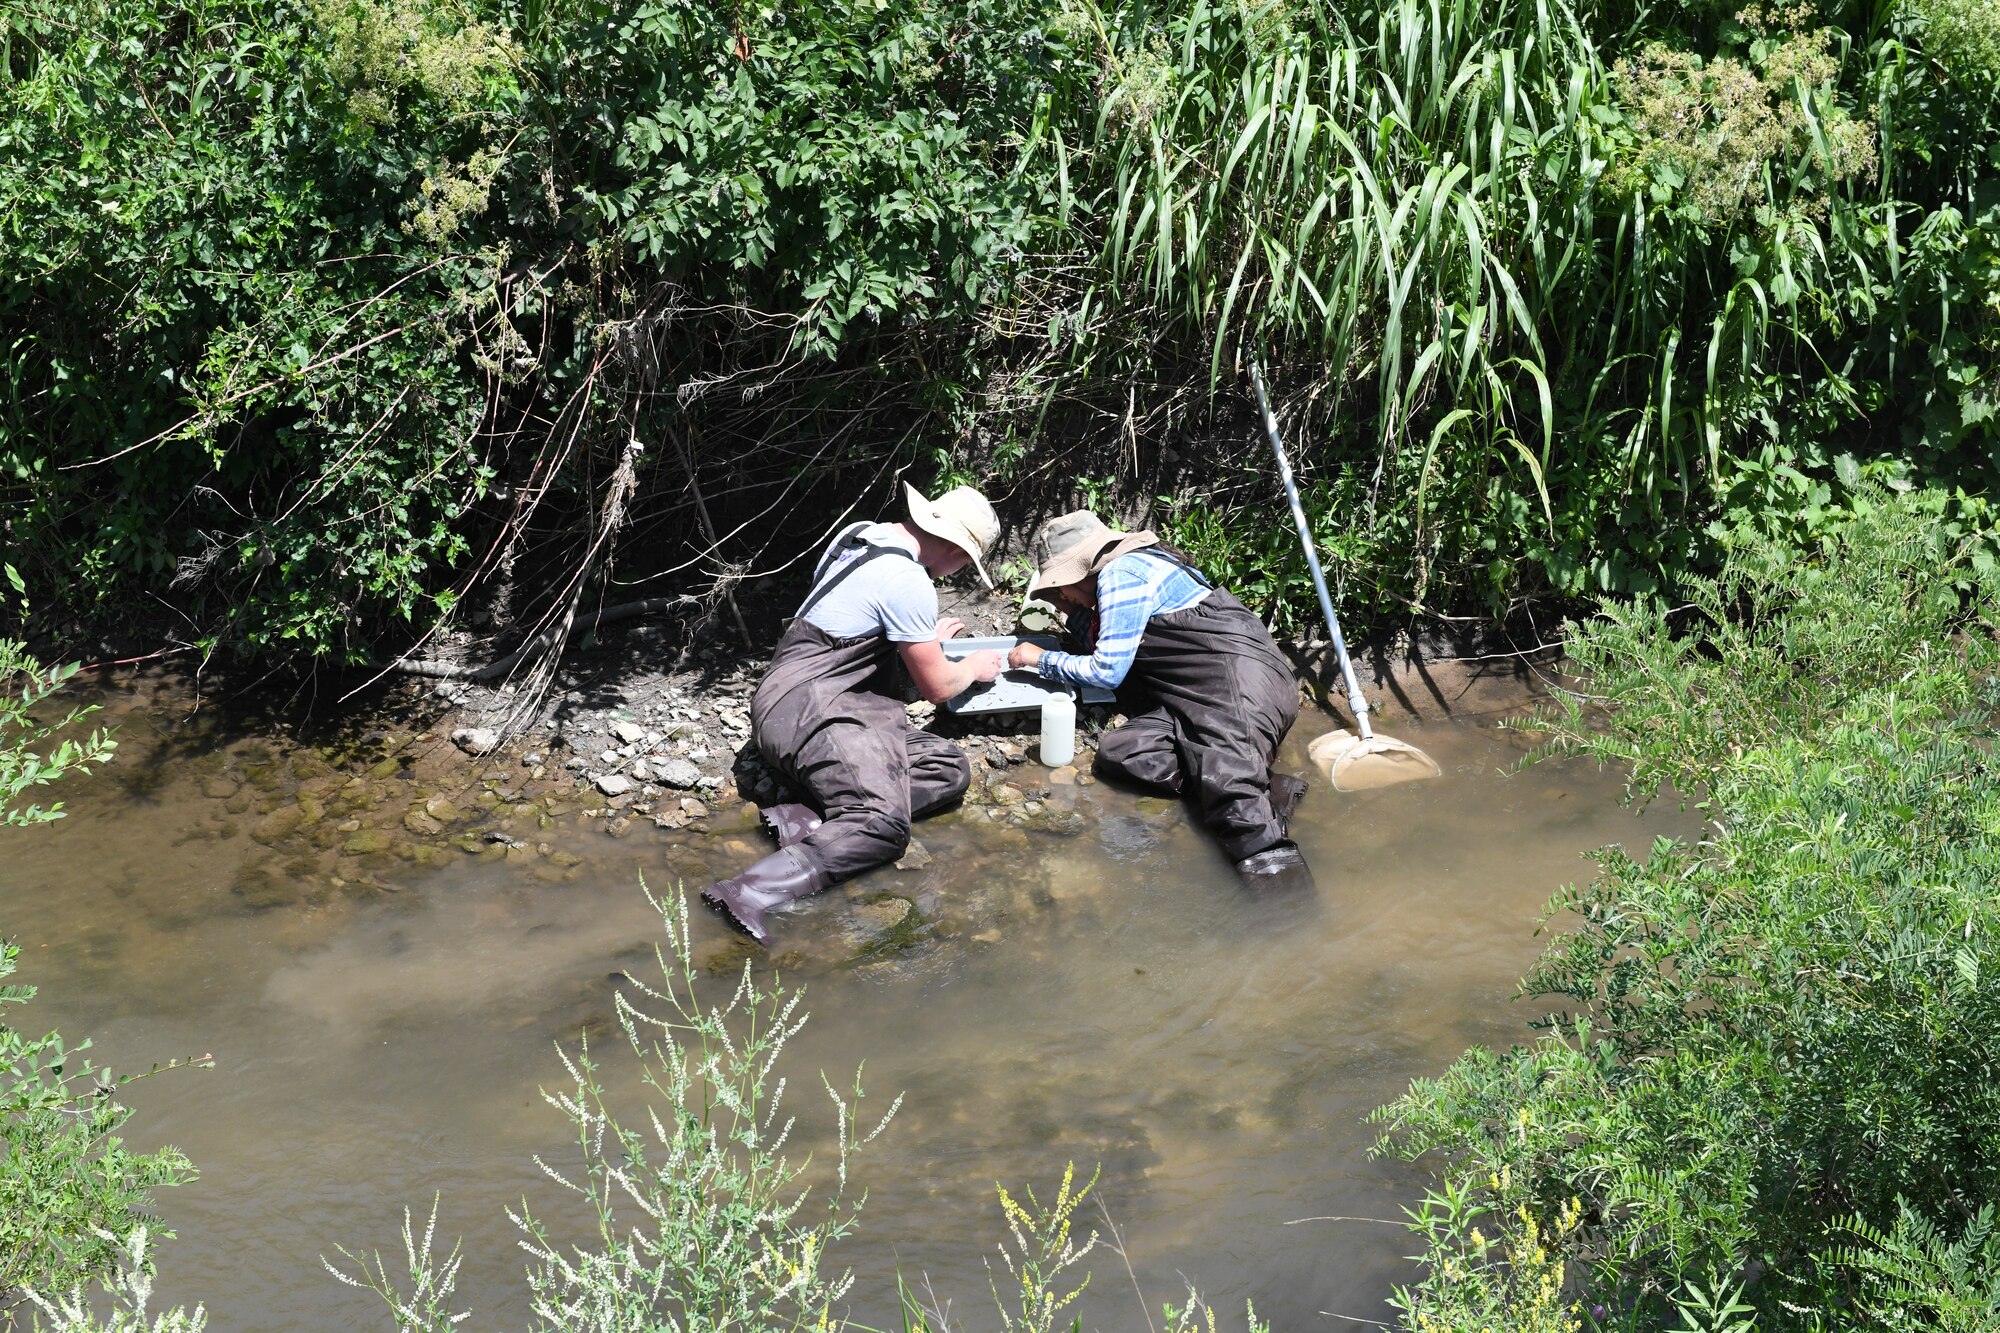 Kansas State University graduate students Josh Wurtz (left) and Daryline Dayzie (right) sift through water collected along the shore of McConnell Creek to pull splinter-sized invertebrates from their samples as part of a site assessment on June 16, 2022, at McConnell Air Force Base, Kansas. The students' visit began an erosion control project involving documenting the health and density of the river's aquatic population and modifying the shoreline of McConnell Creek to evaluate change. (U.S. Air Force photo by John Van Winkle)